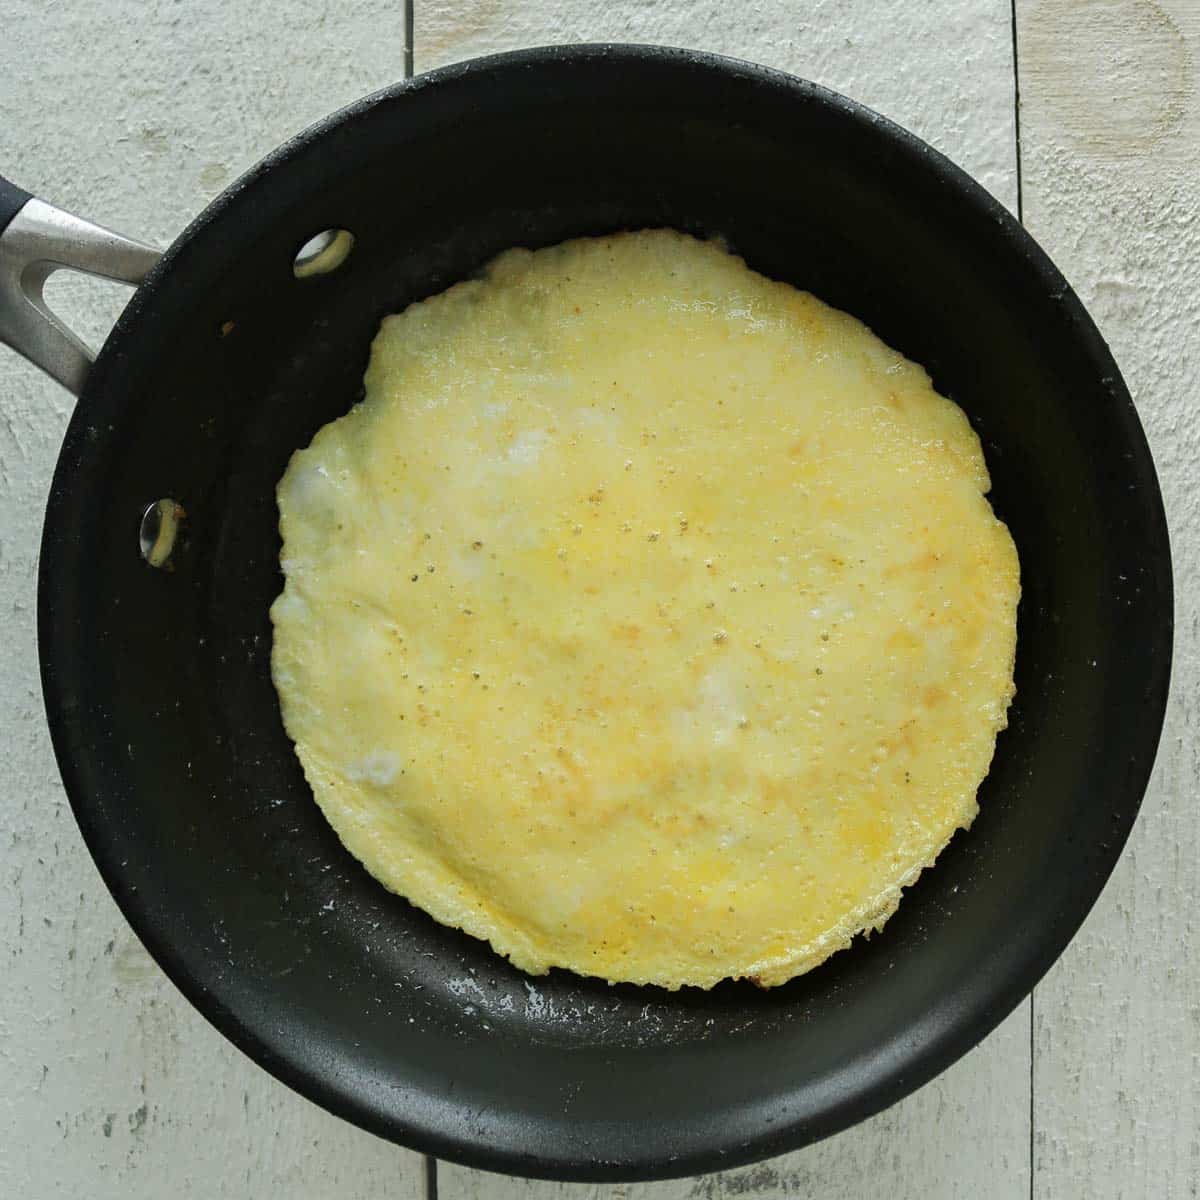 Cooked egg in a frying pan.